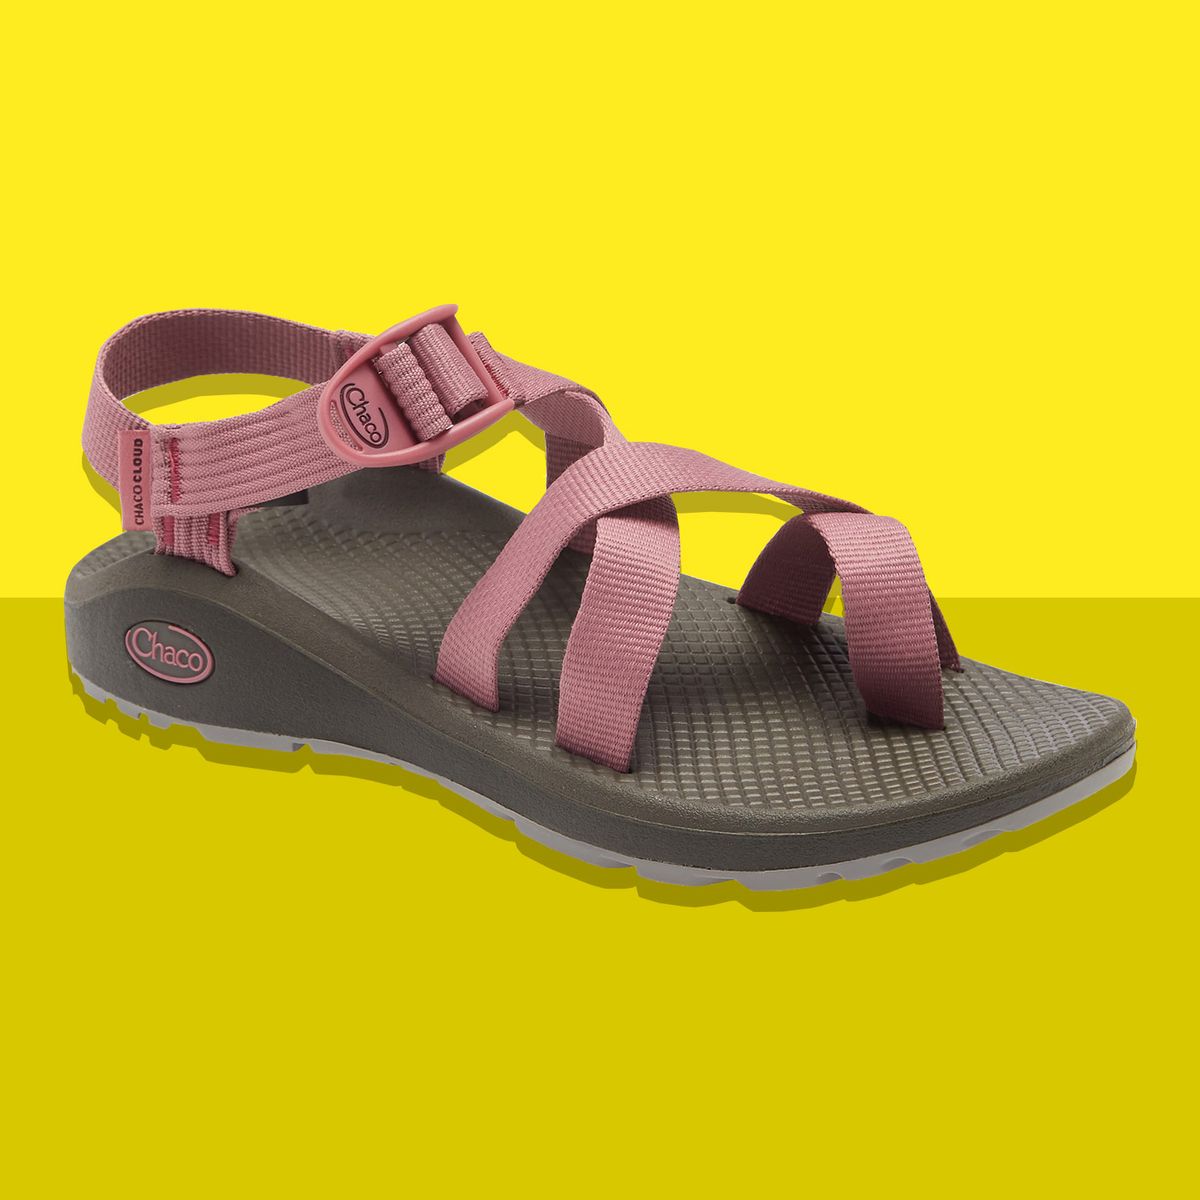 Chaco Z/Cloud 2 Sport Sandals Nordstrom 